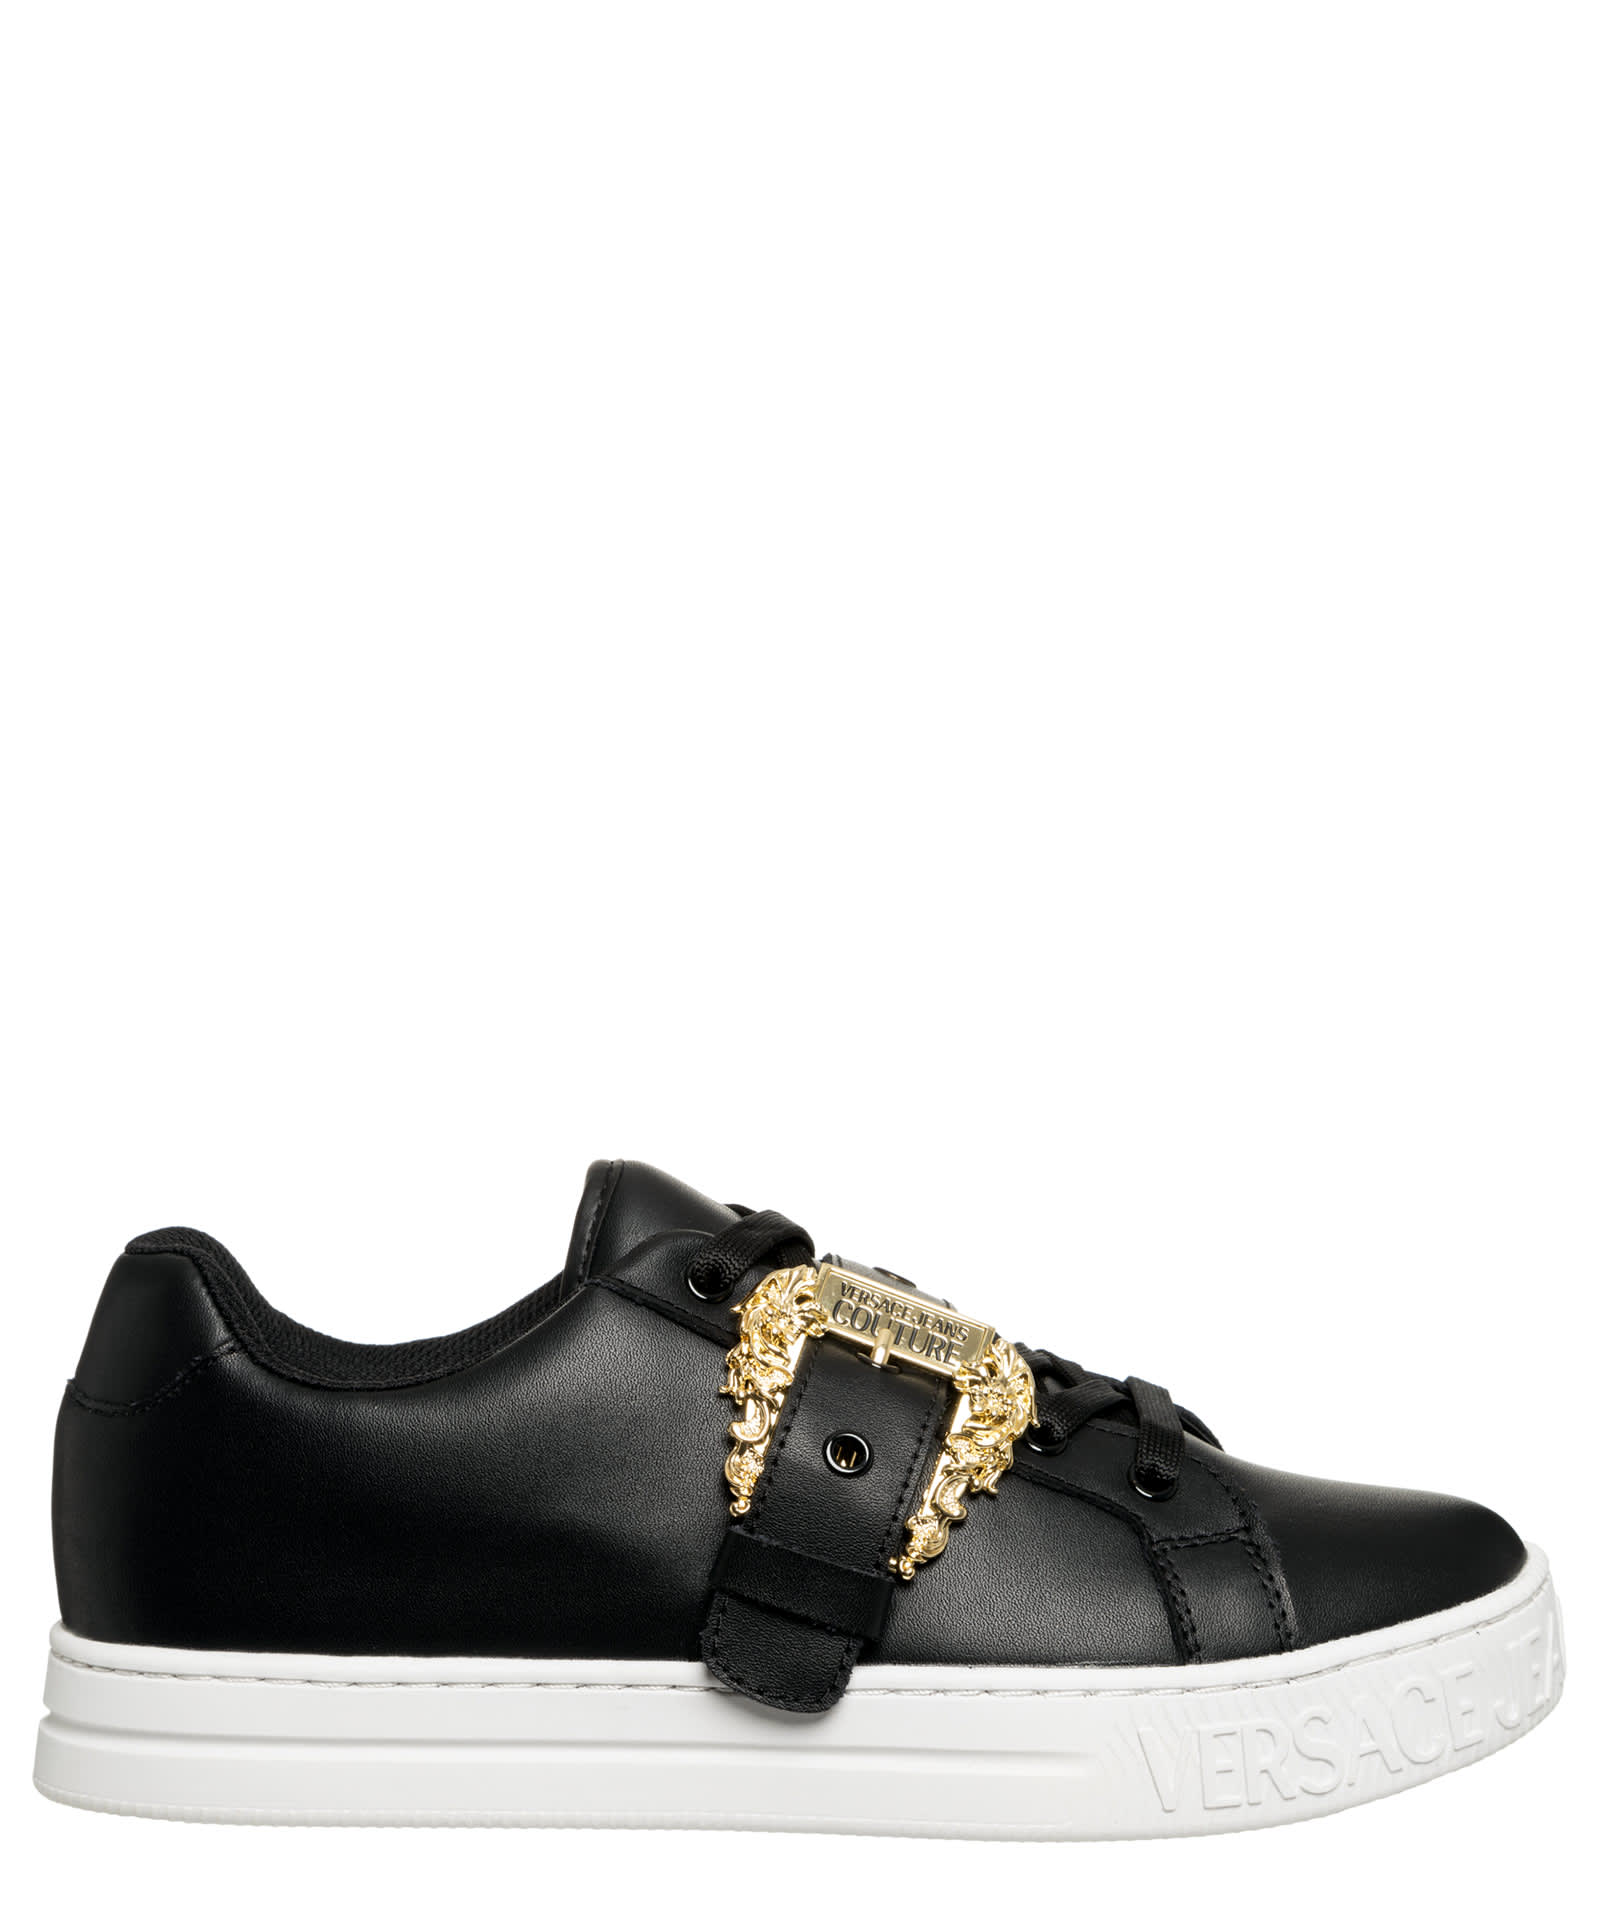 VERSACE JEANS COUTURE COURT 88 LEATHER SNEAKERS